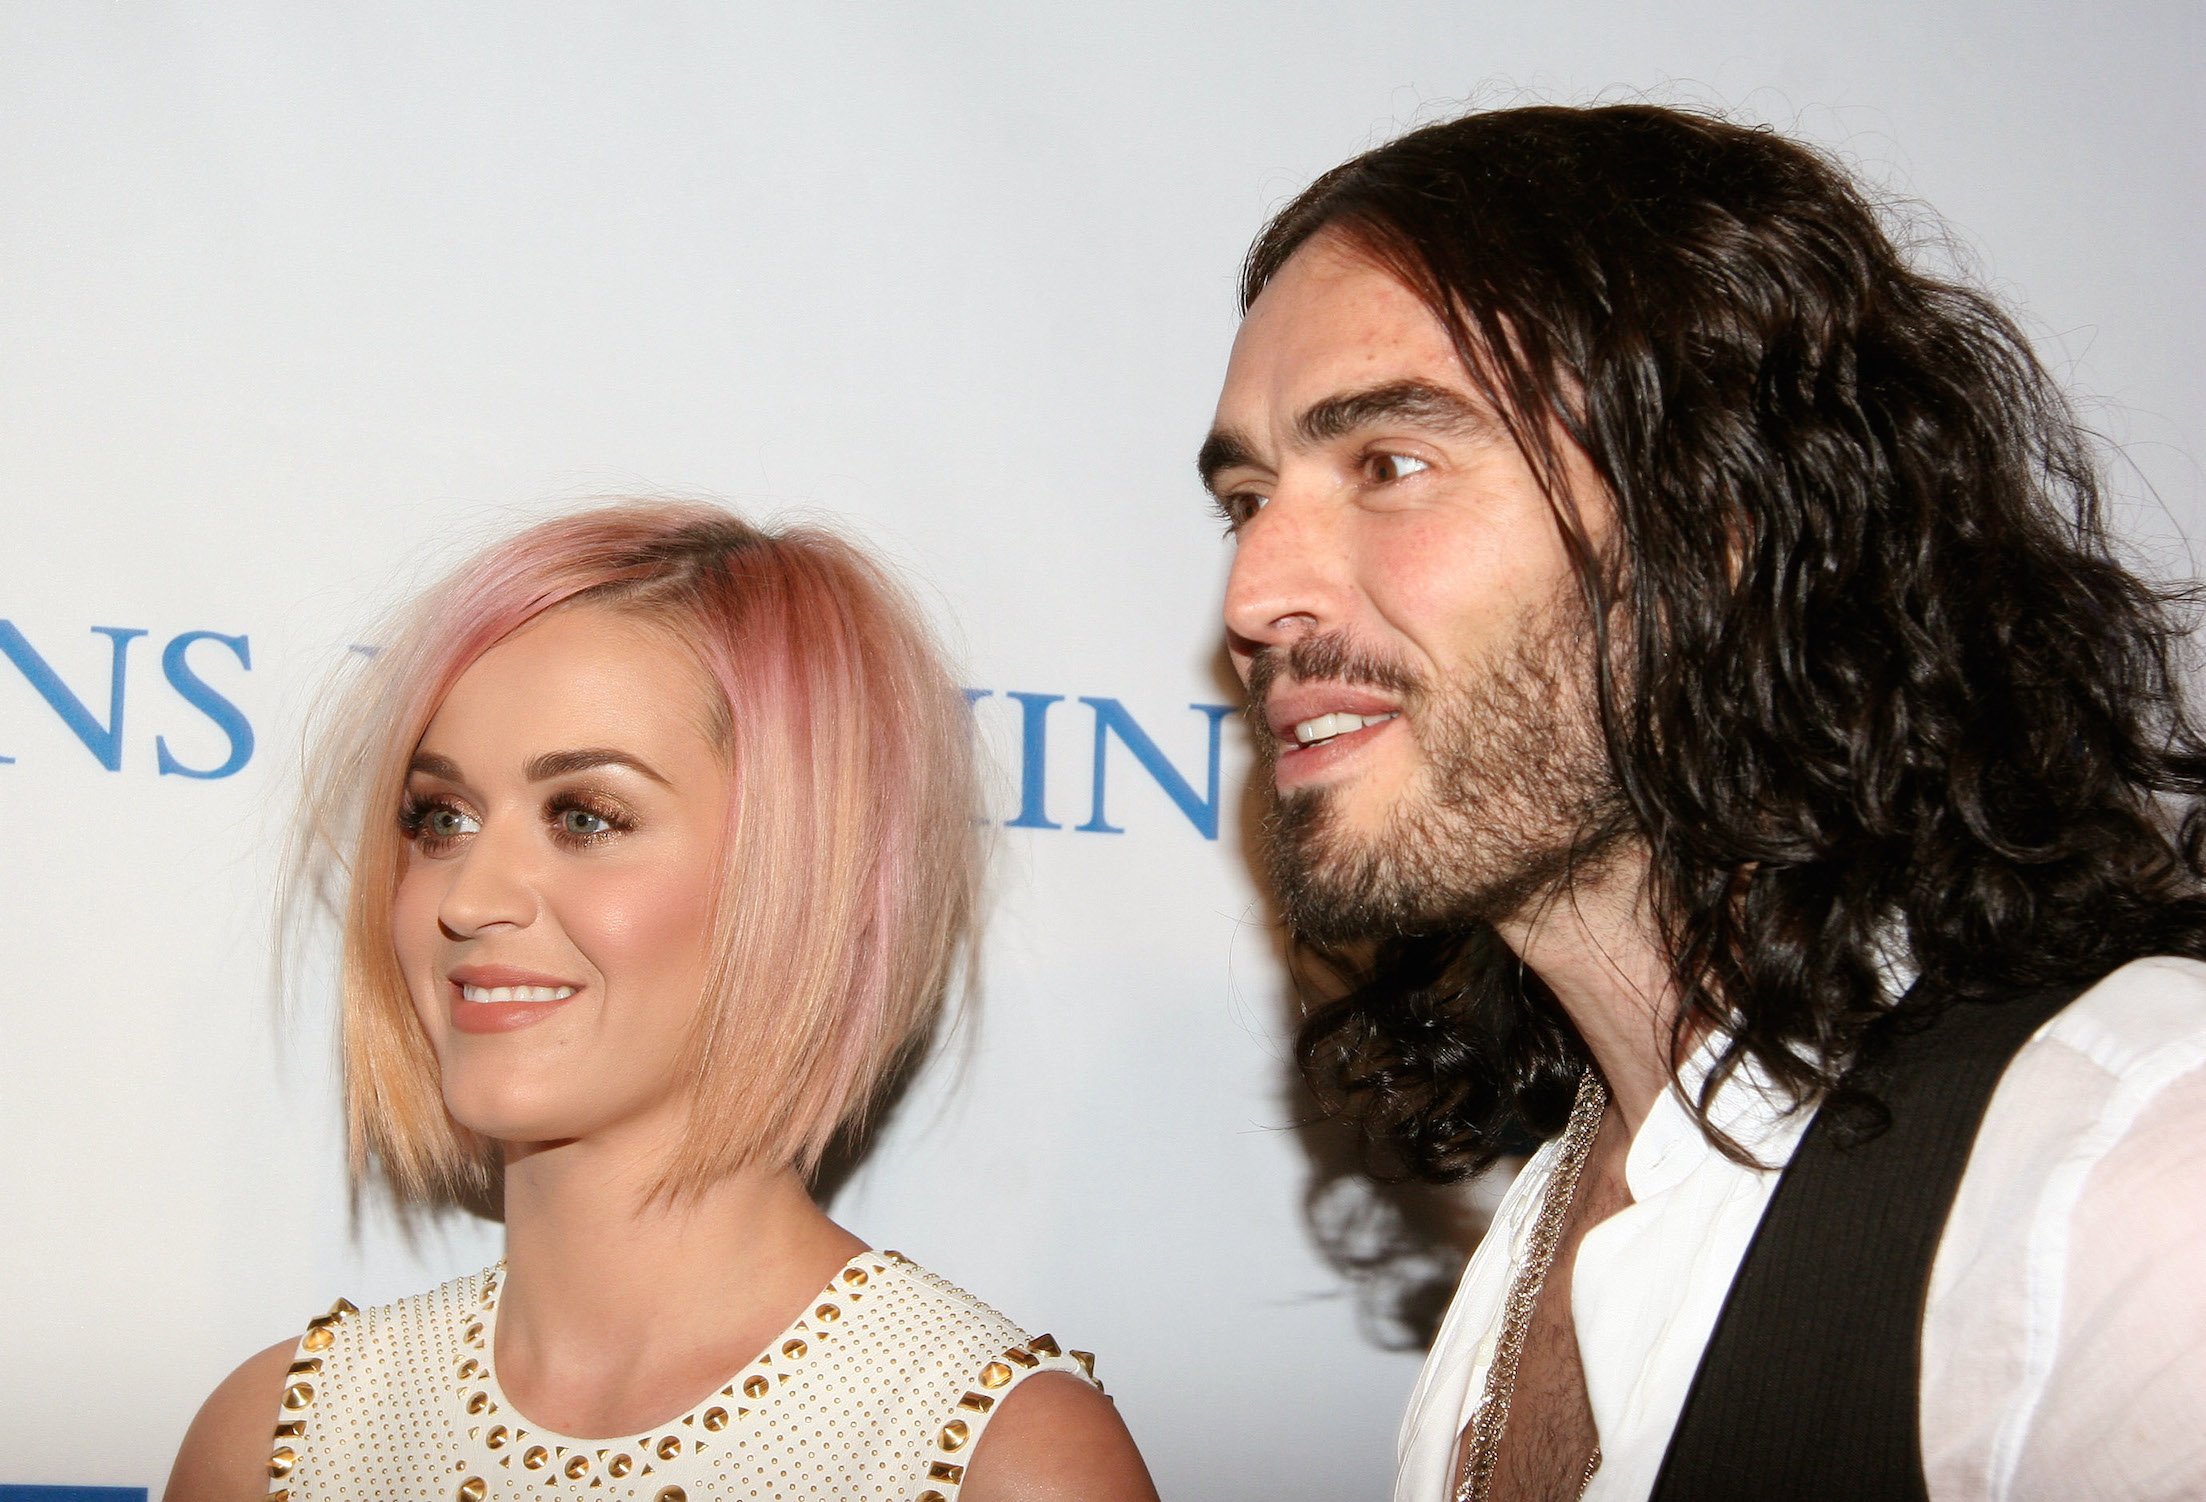 Katy Perry (L) and actor Russell Brand attend the 3rd annual 'Change Begins Within' benefit celebration